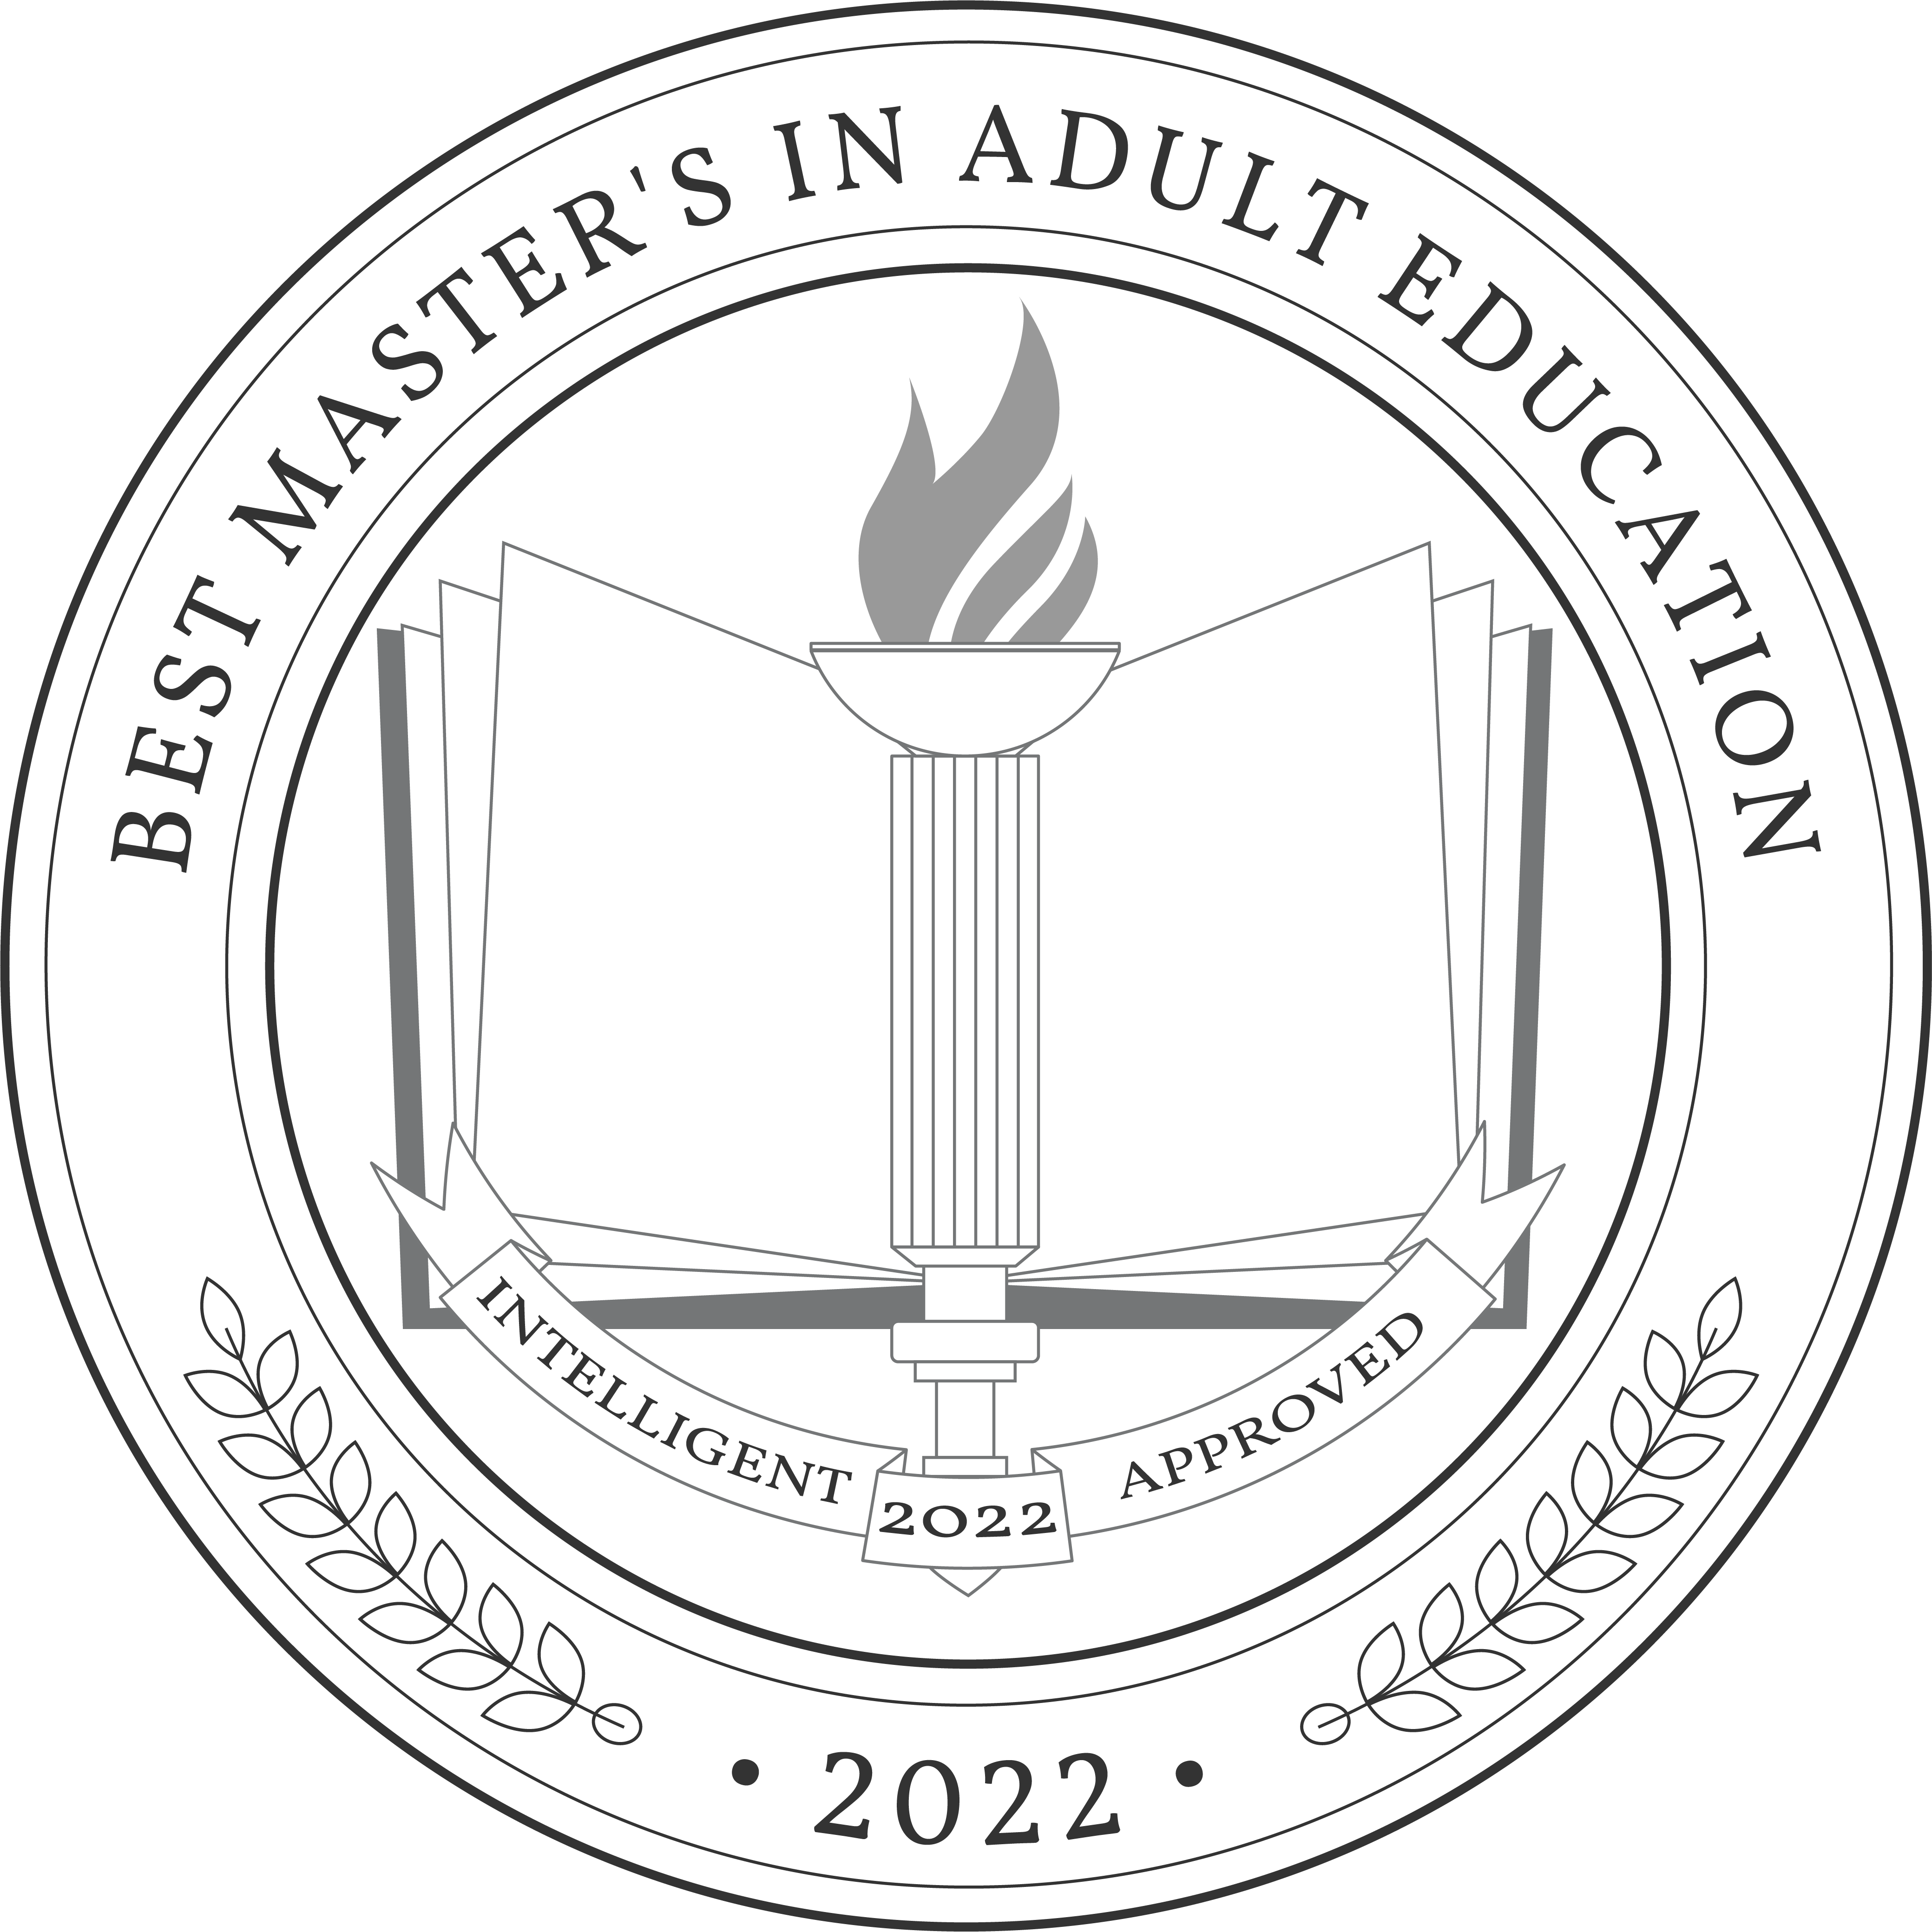 best-master_s-in-adult-education-badge-1.png